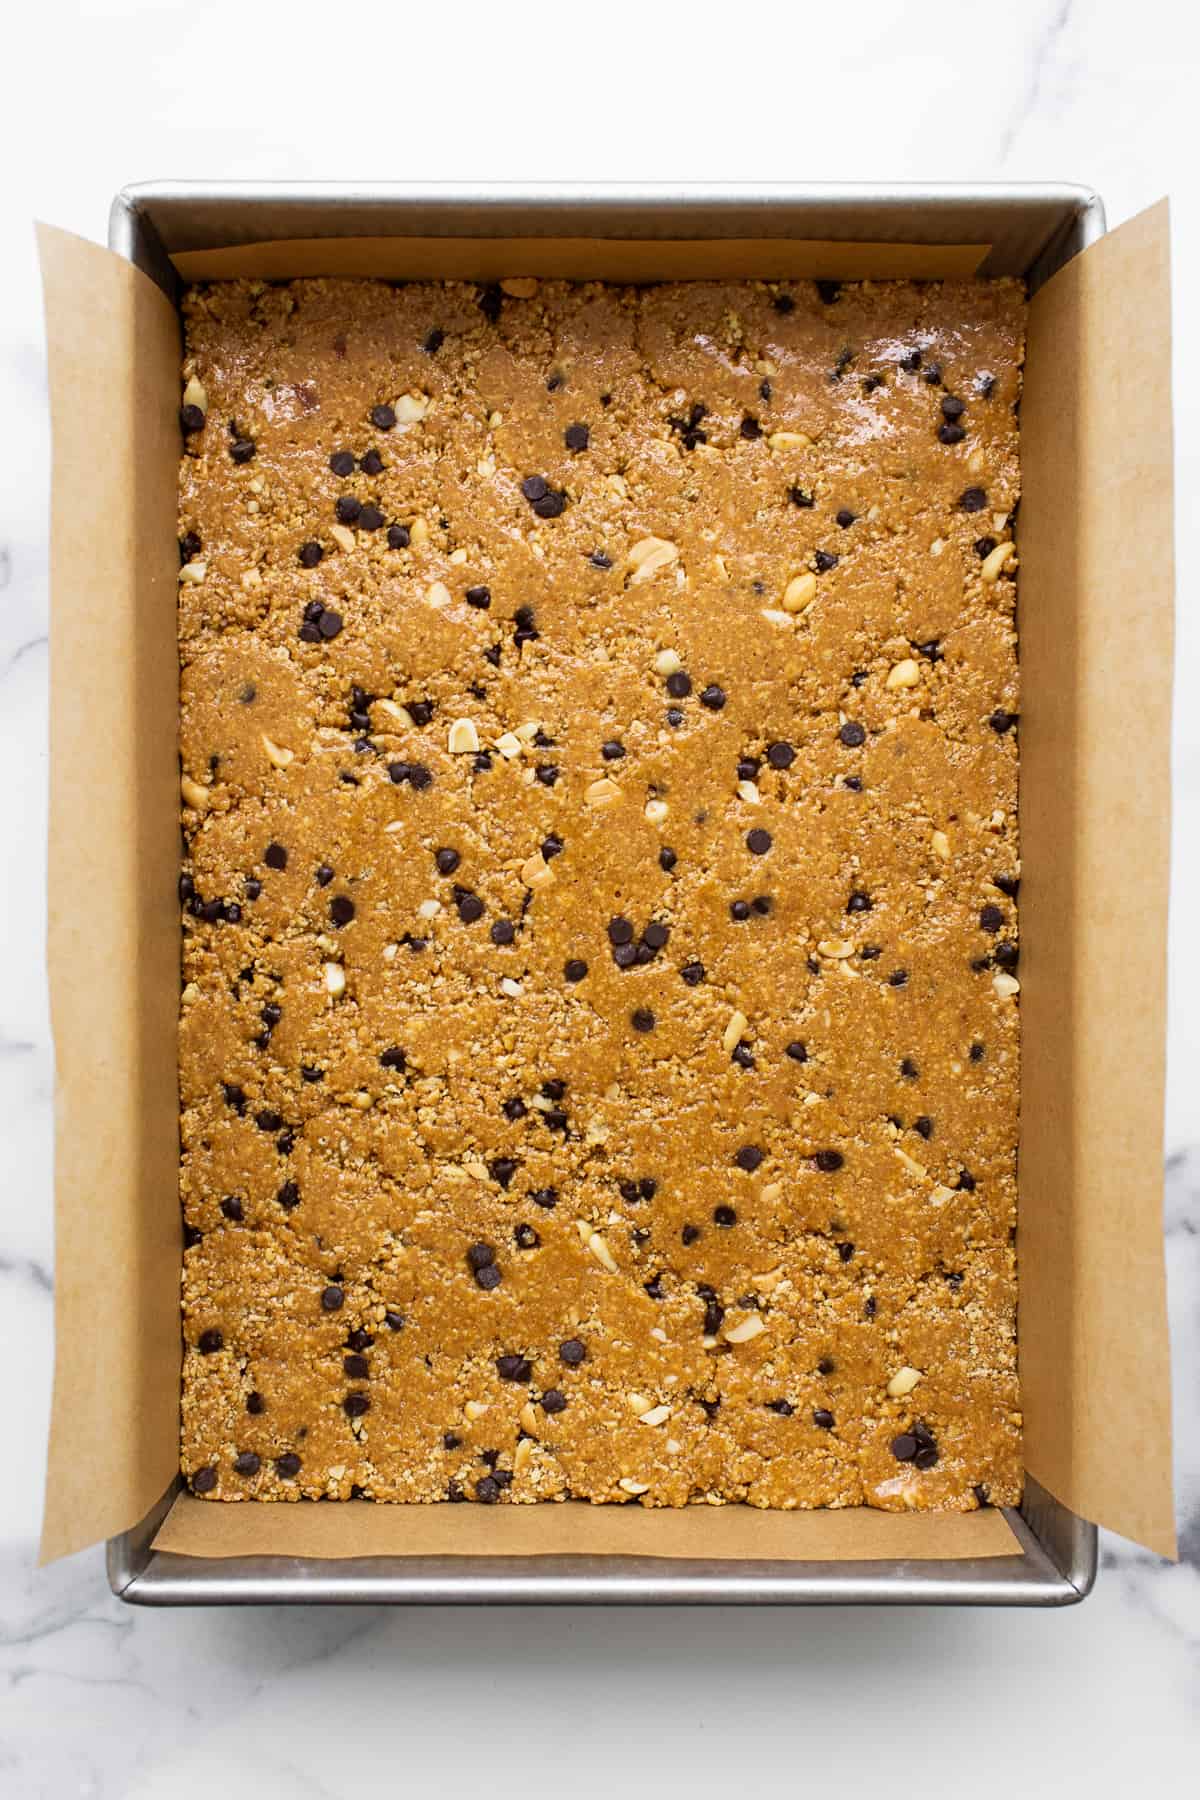 No bake peanut butter bars pressed into a cake pan.